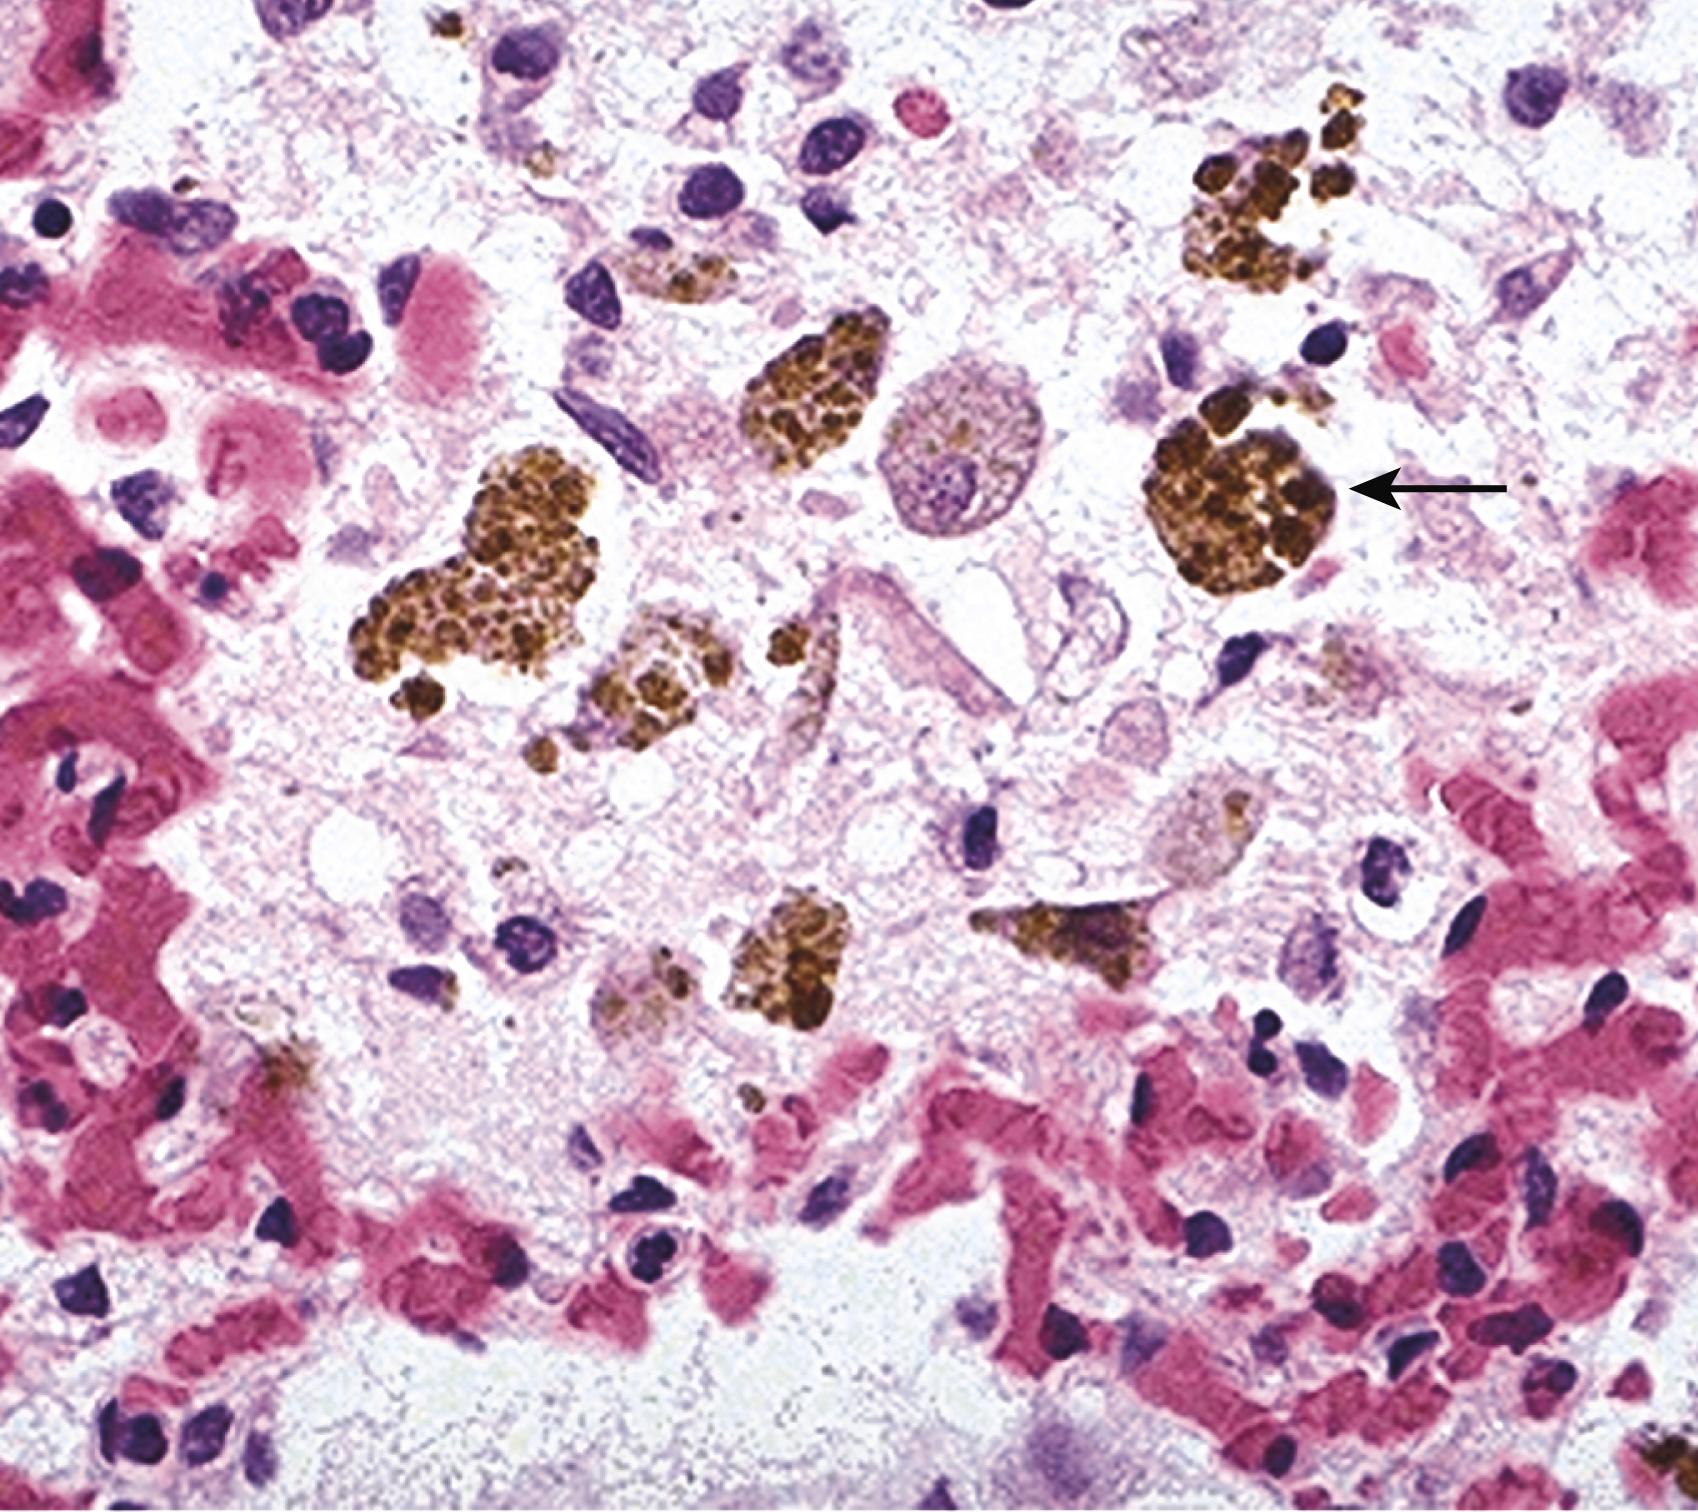 eFIG. 3.1, “Heart failure” cells. The alveolar space contains pinkish edema fluid and “heart failure cells,” macrophages with brown hemosiderin pigment (arrow) derived from phagocytosed red cells that leaked from congested capillaries.